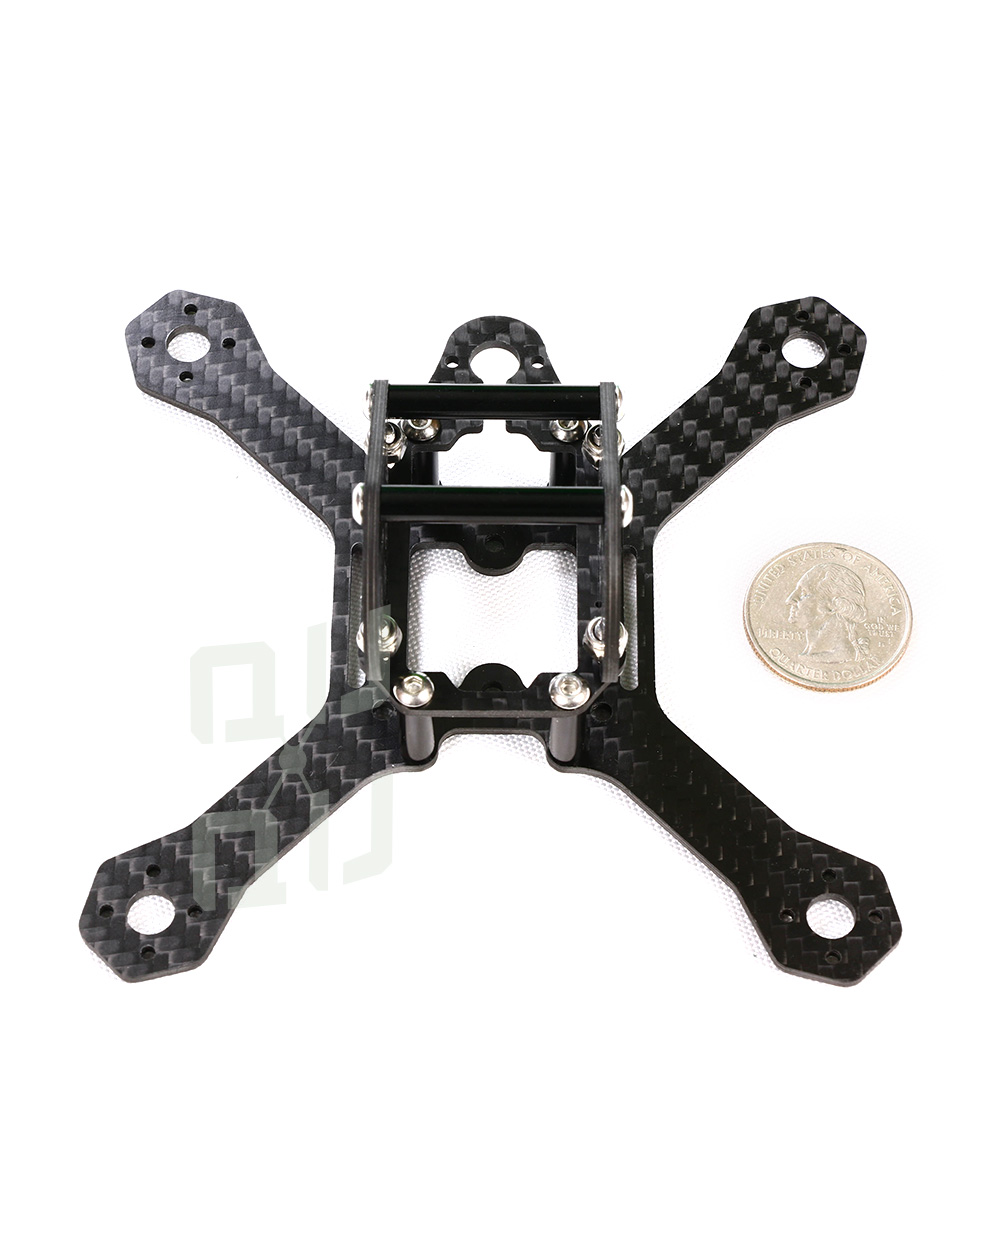 qq130 fully built 3" Racing Drone frame by QuadQuestions top view